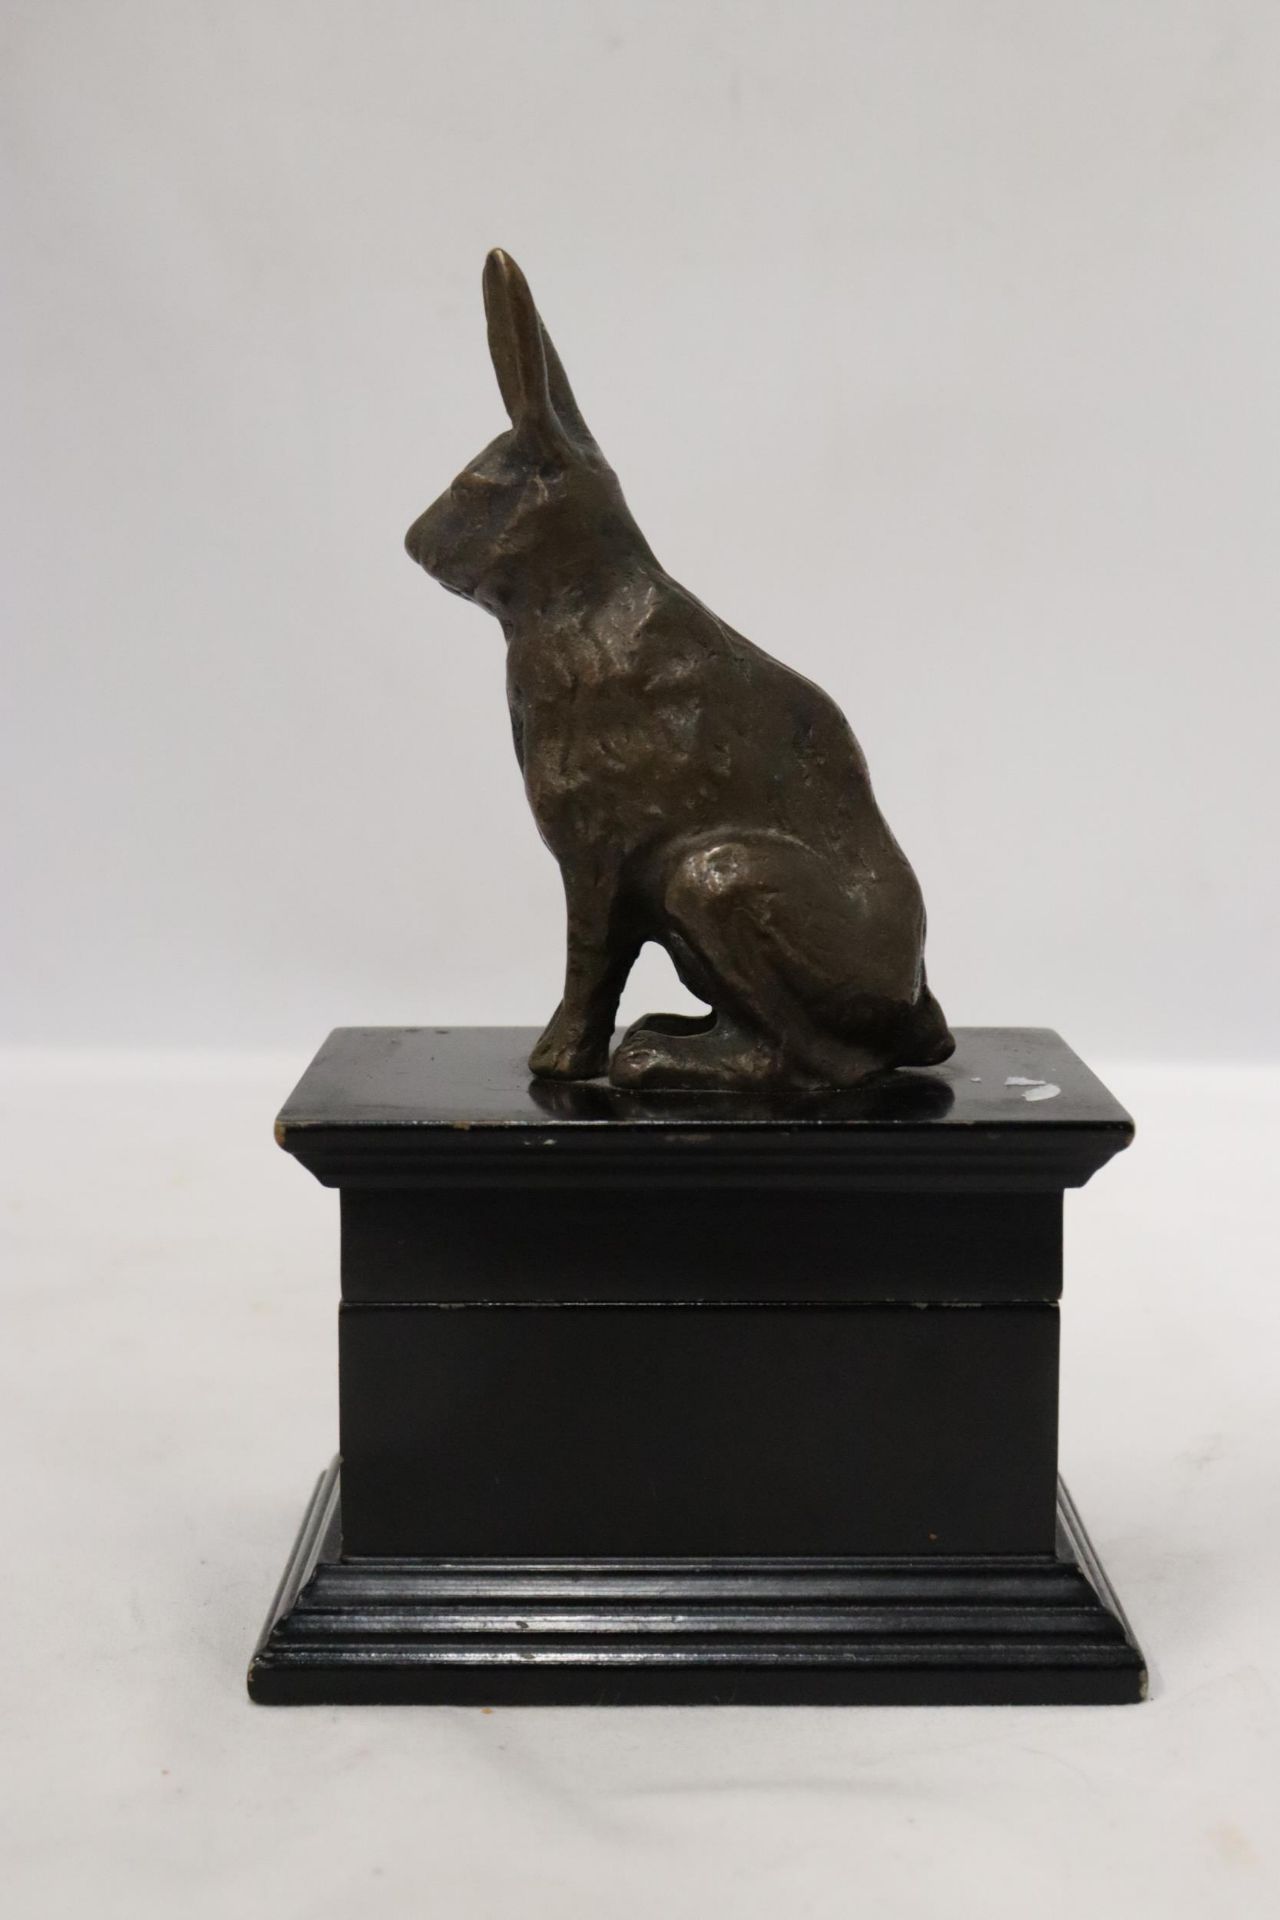 A FIGURE OF A HARE SITTING ON A WOODEN TRINKET BOX